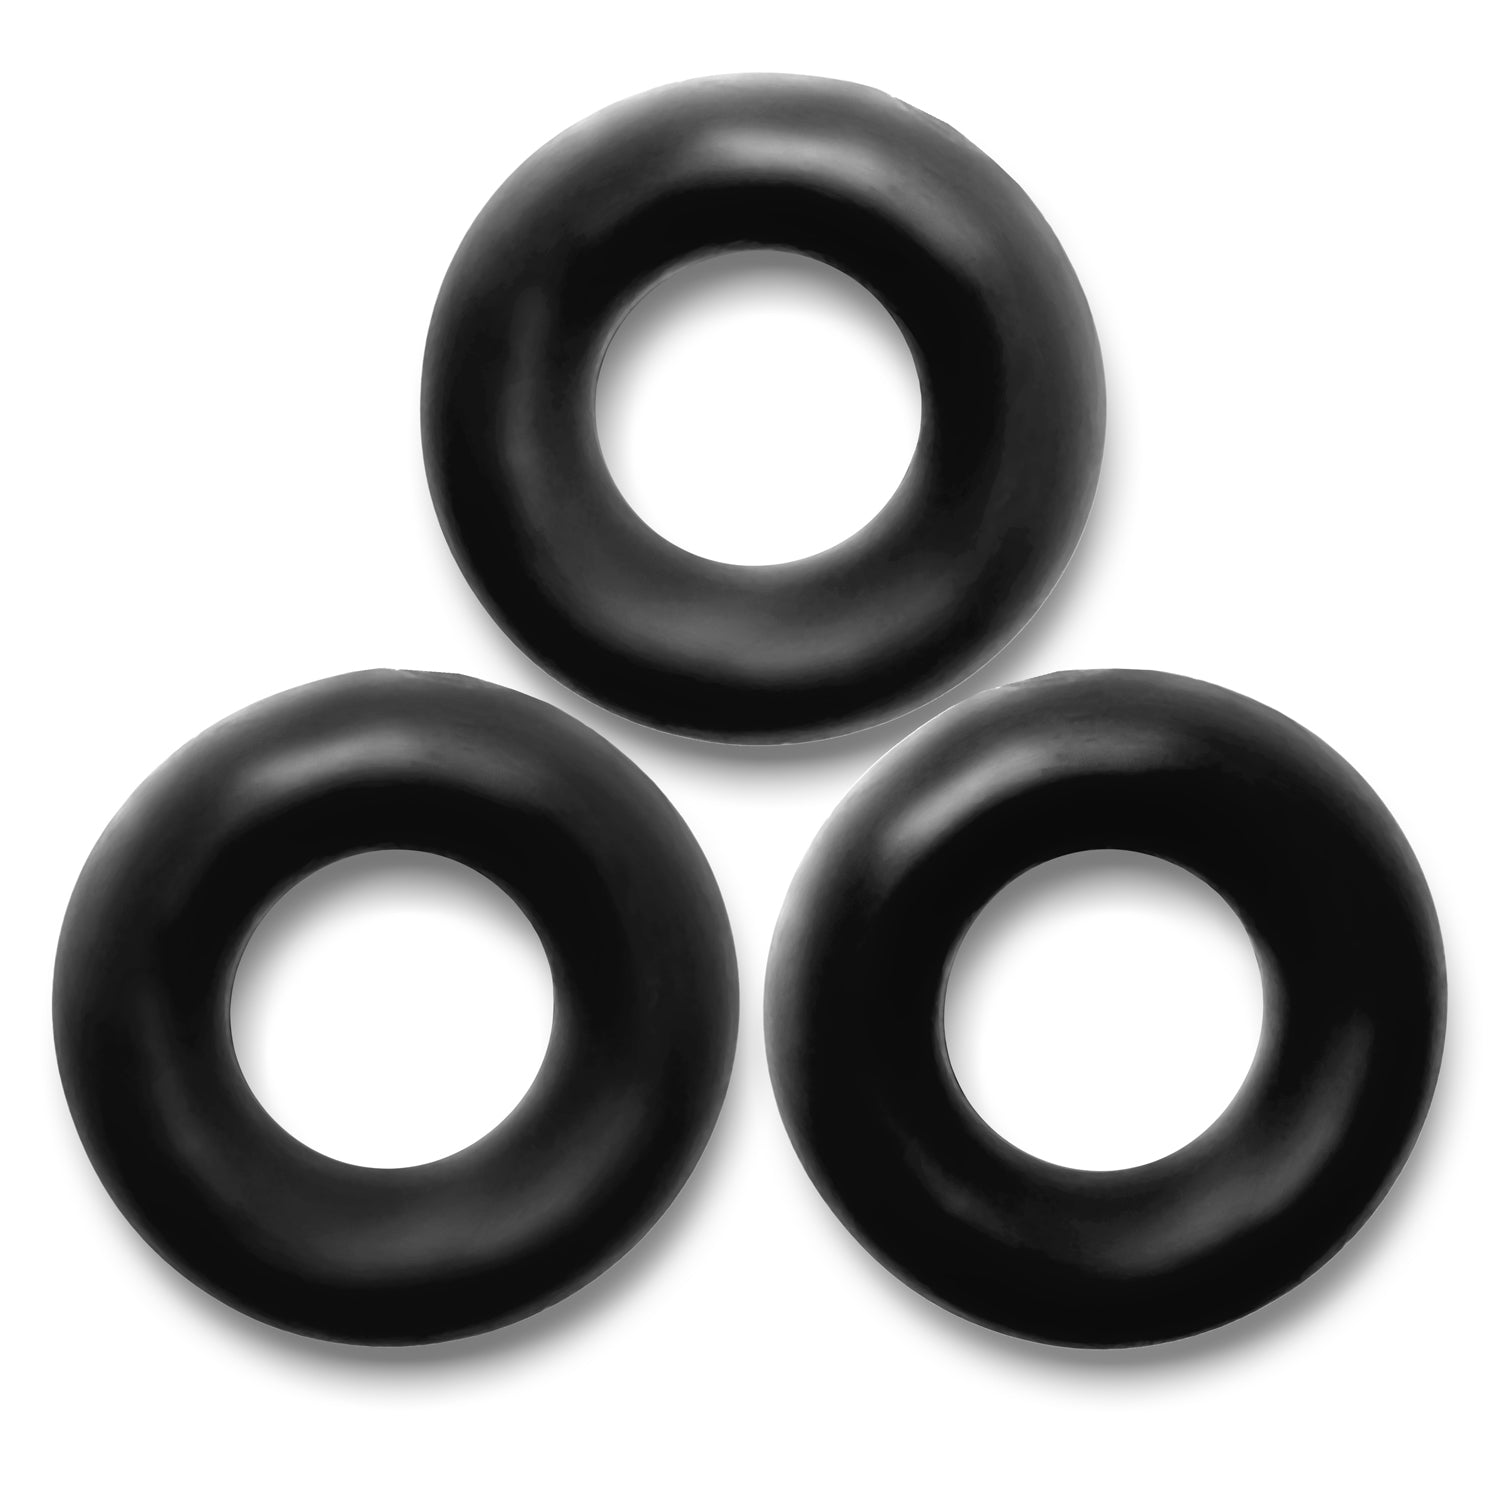 Oxballs FAT WILLY 3-Pack Jumbo Cockrings